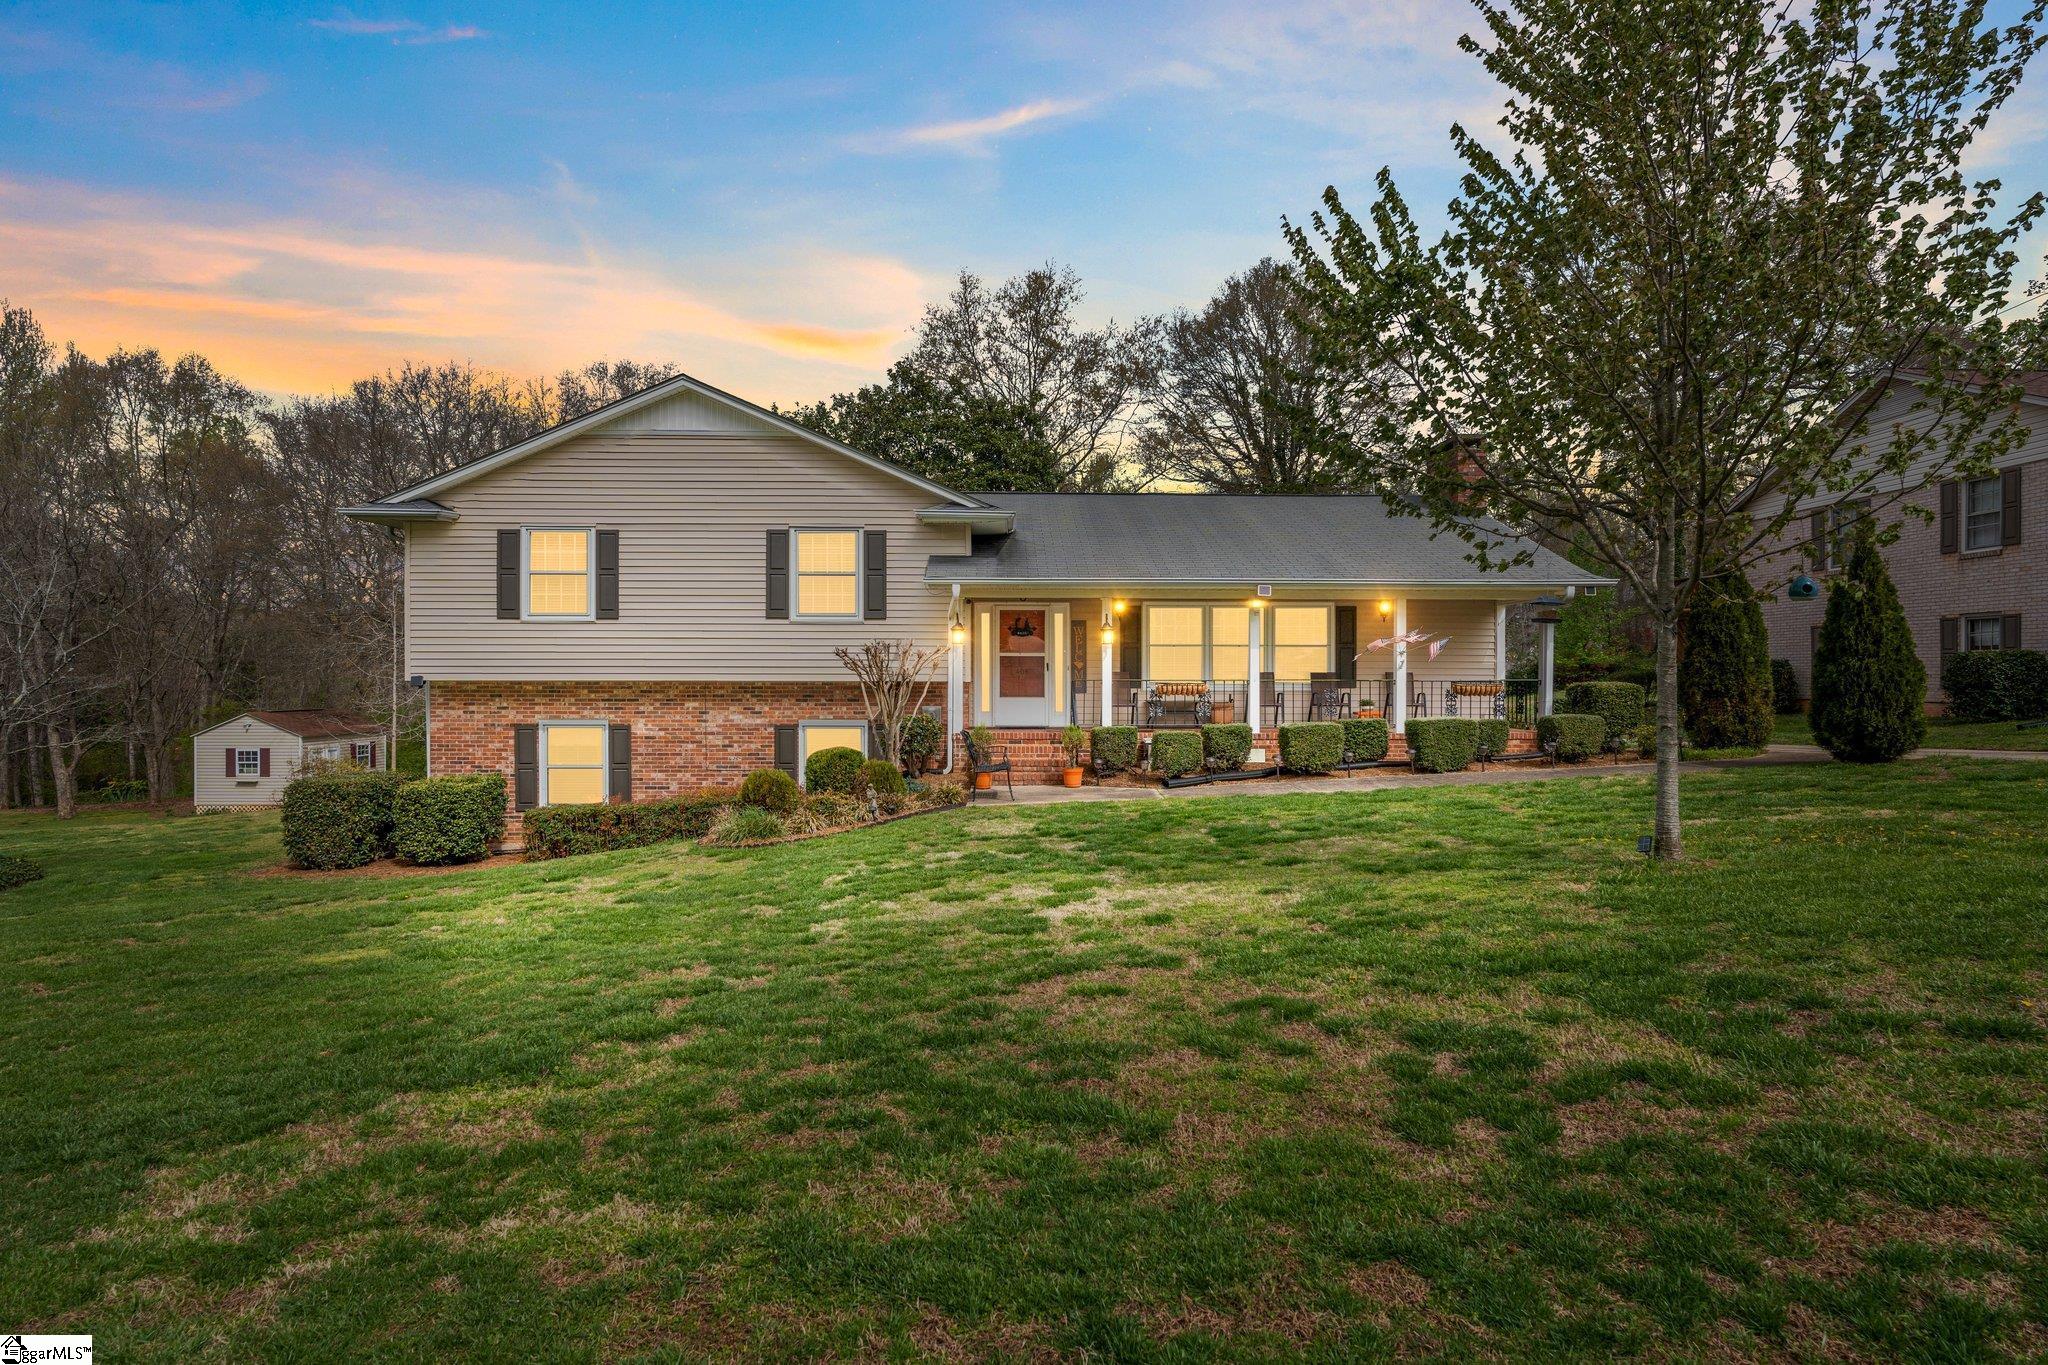 408 Old Stagecoach, Easley, SC 29642